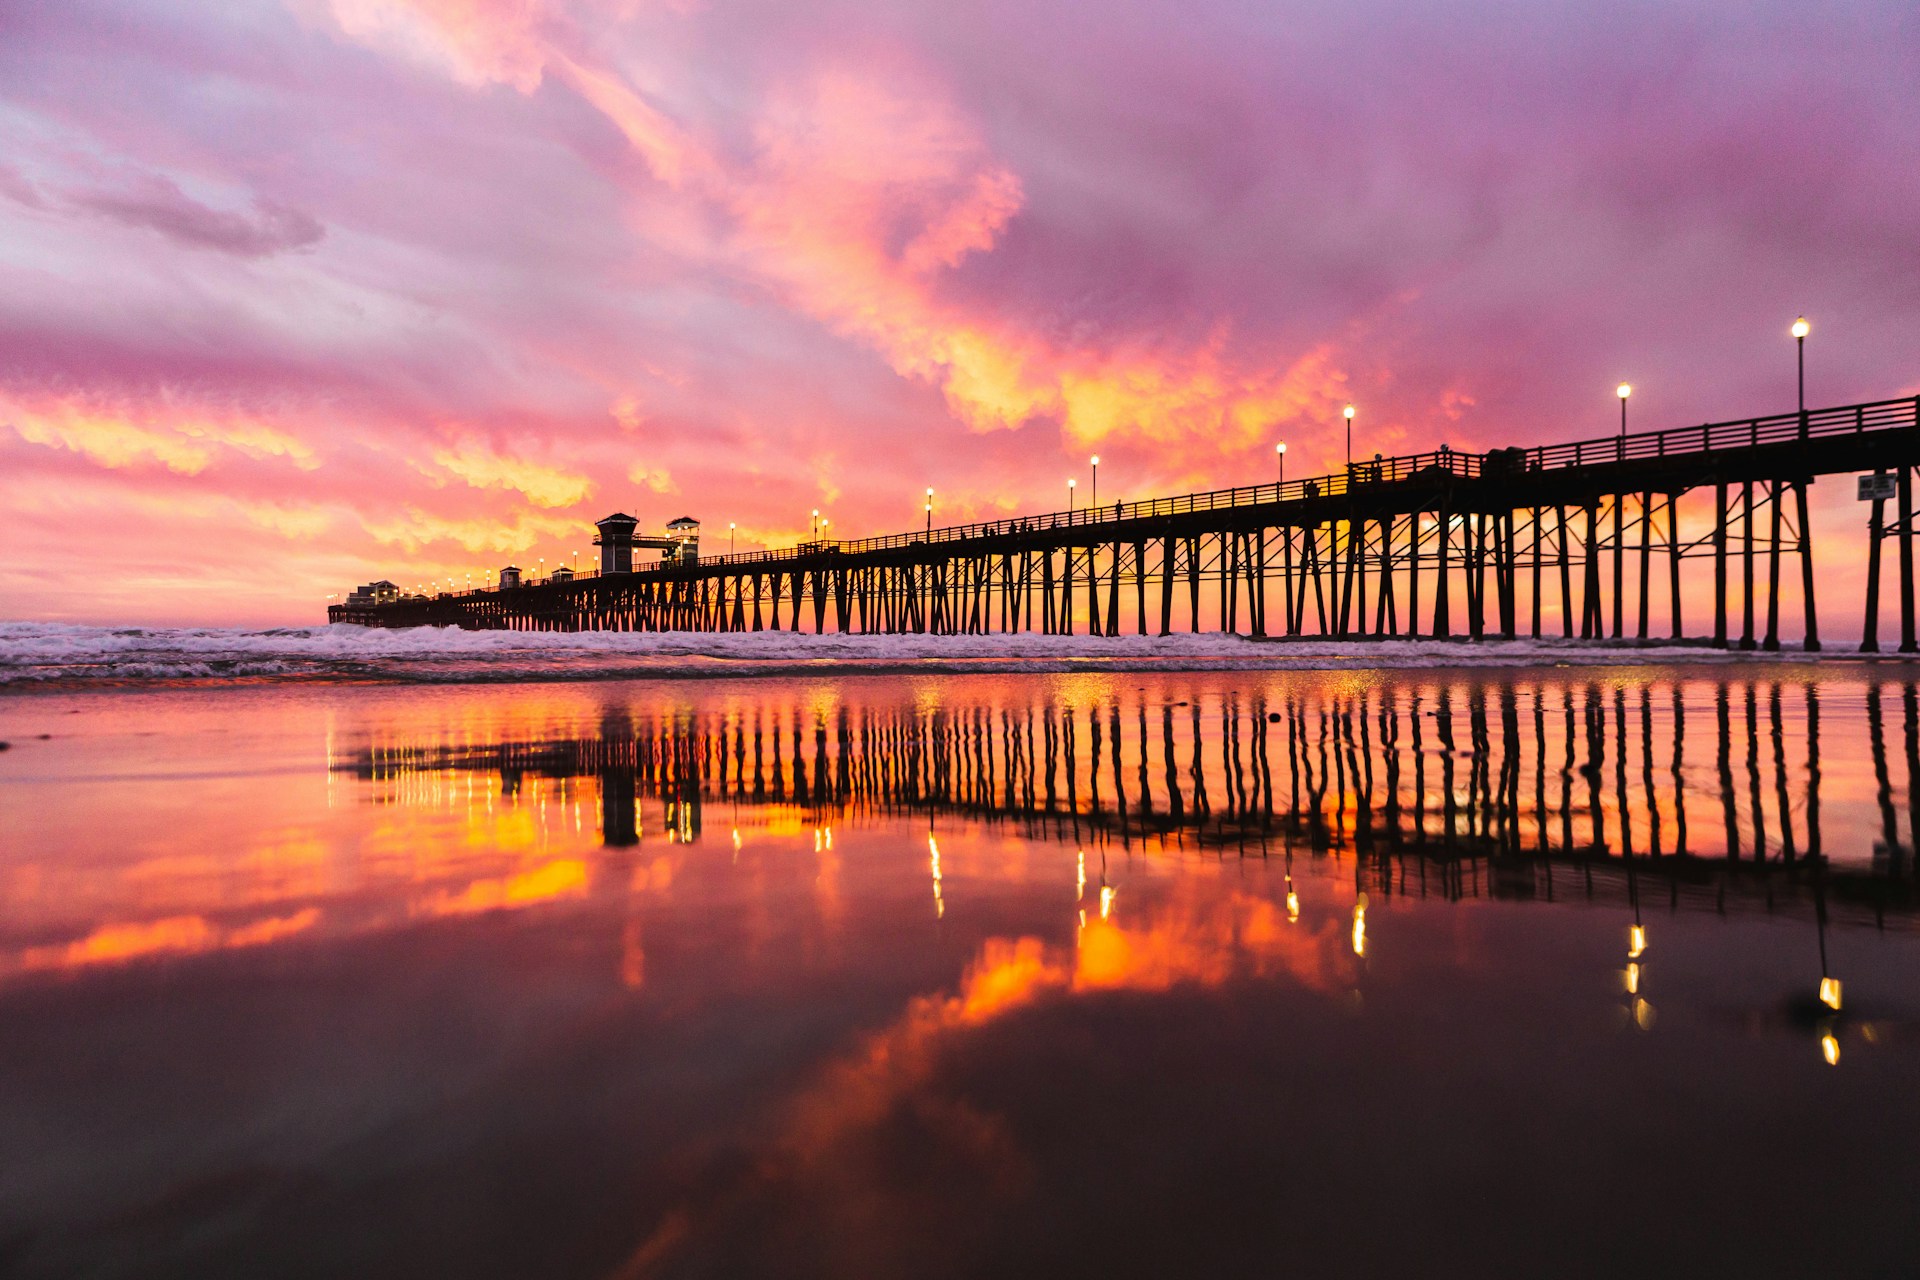 Stop by the Oceanside Pier at sunset